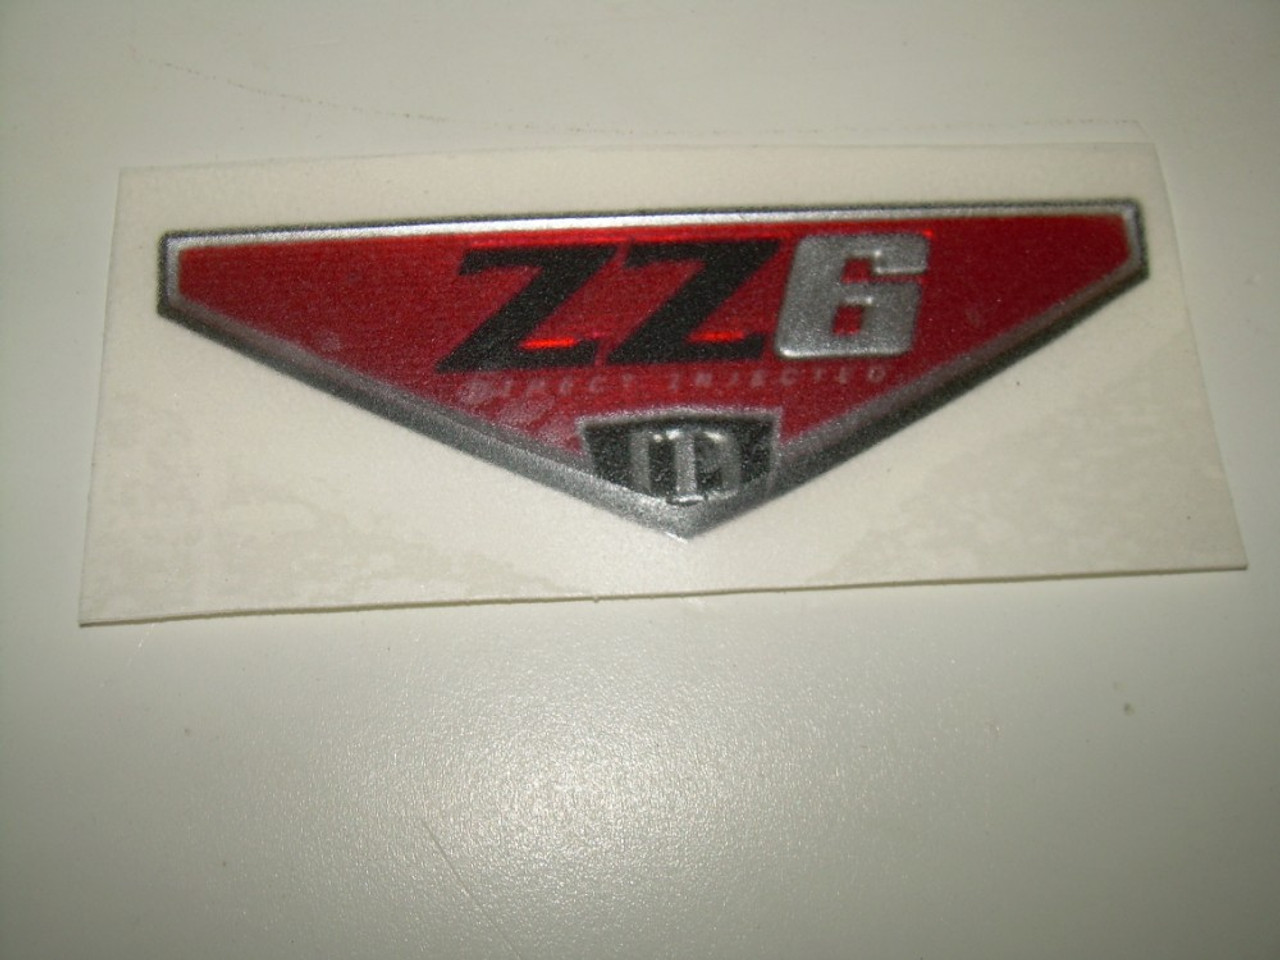 DECAL ZZ6 DOMED INSERT 1.02' X 2.96" RED